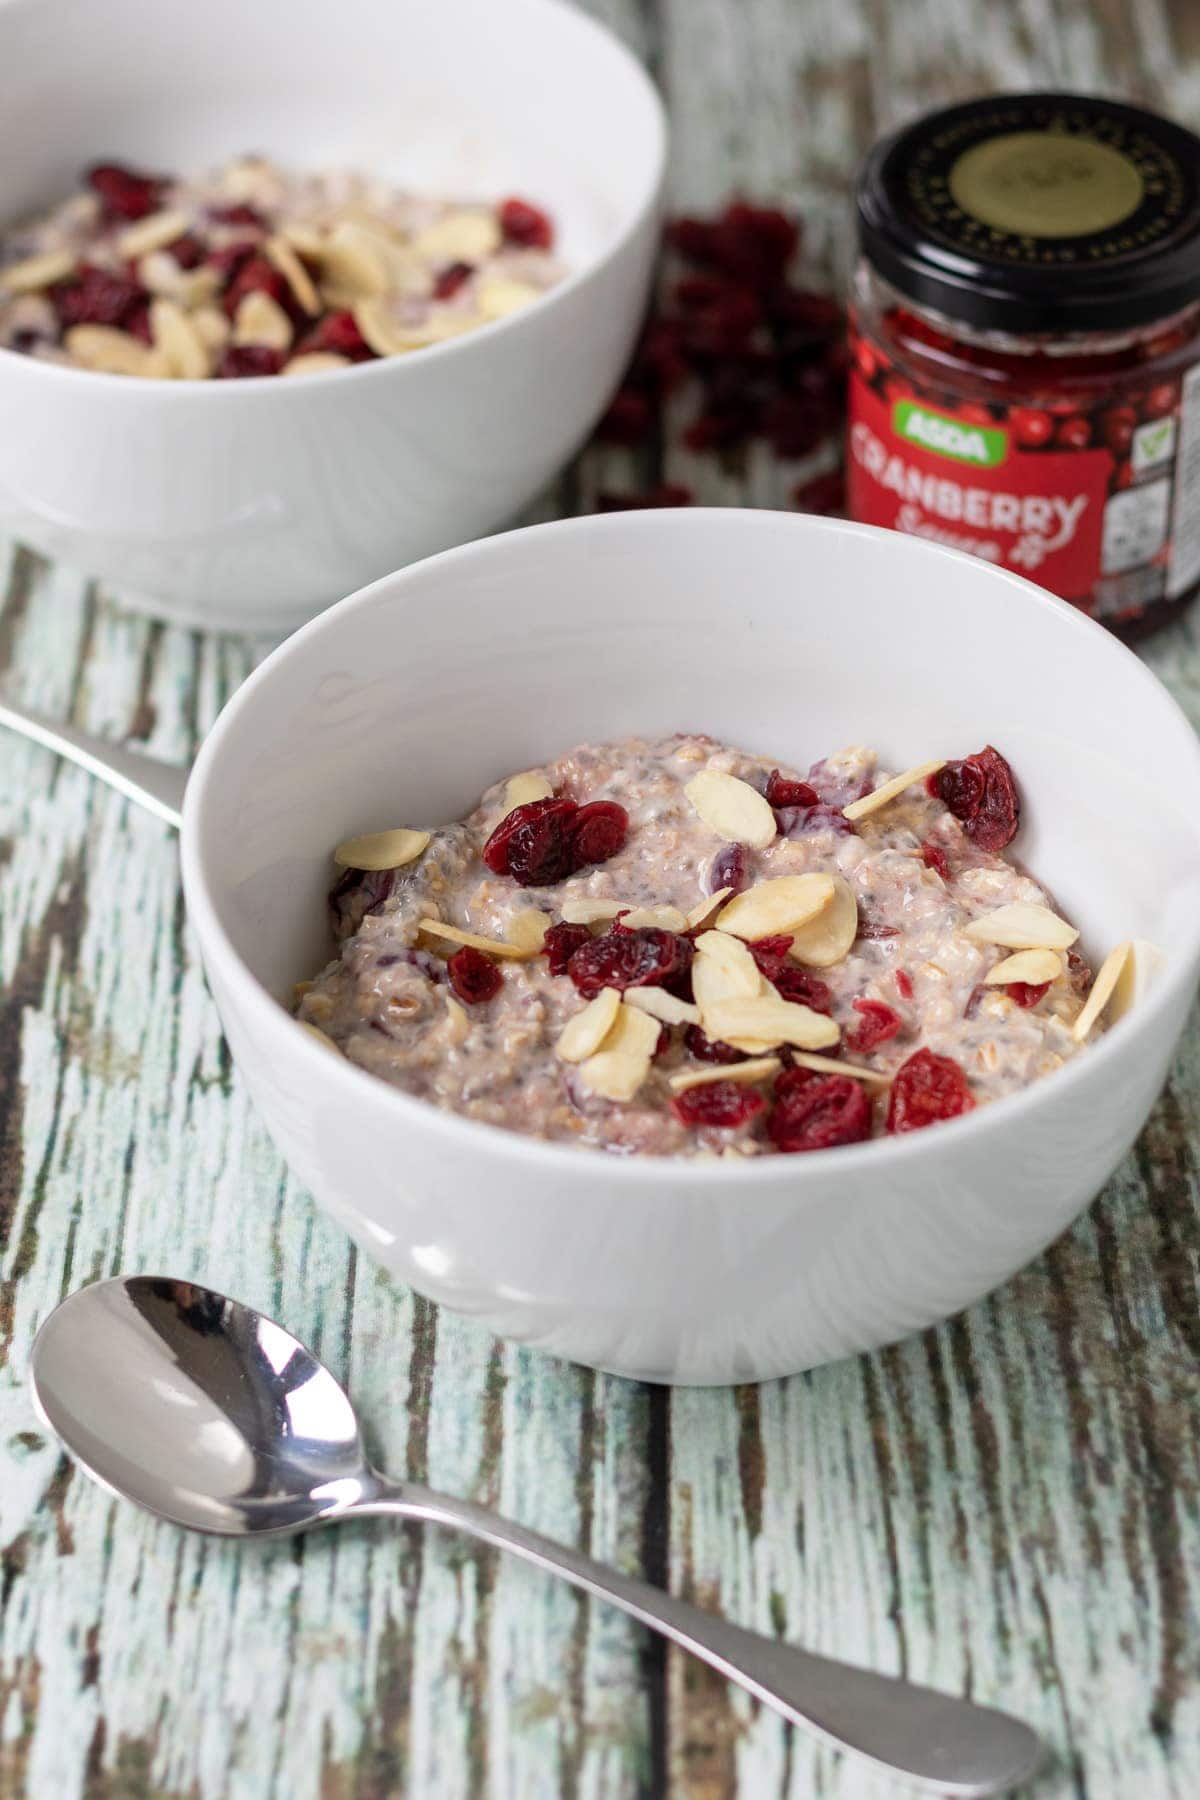 Two bowls of cranberry oats breakfast with spoon in front. A jar of cranberry sauce at the back right.